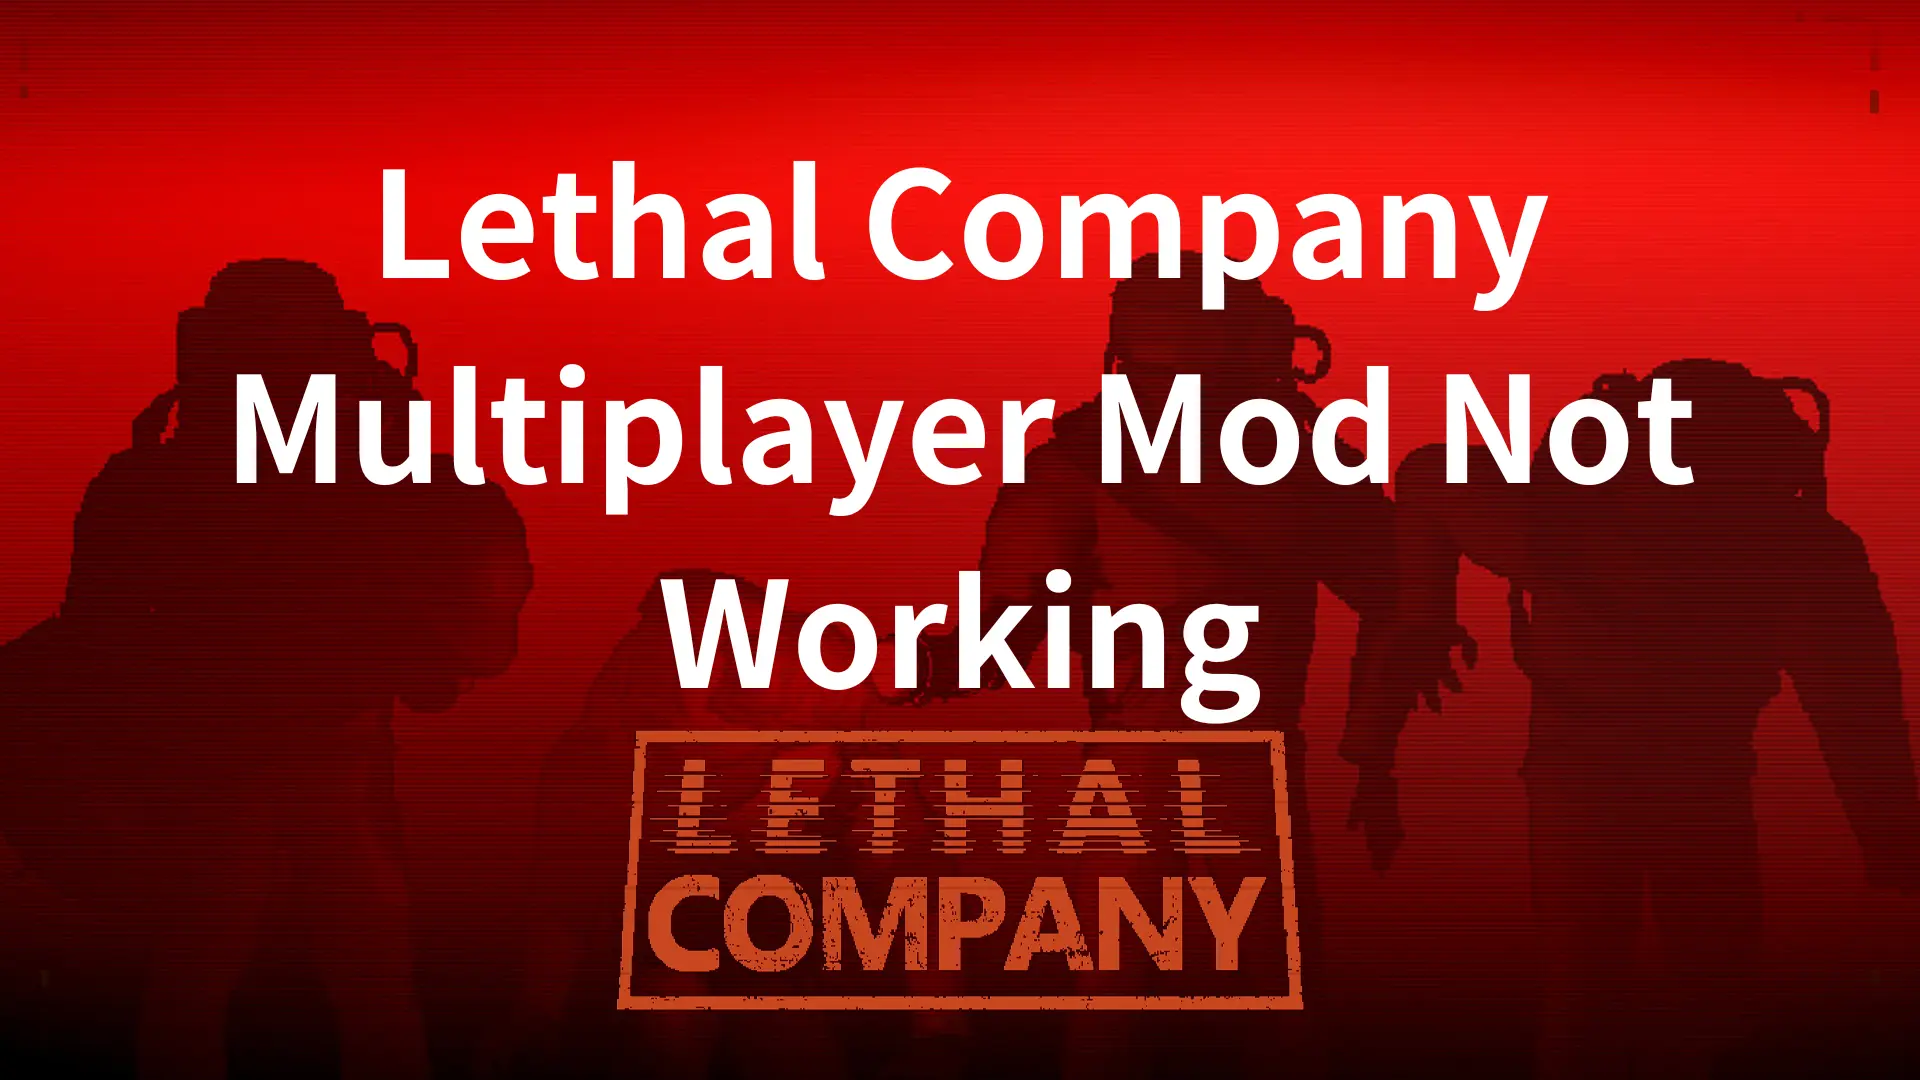 Lethal Company multiplayer mod: Play with more than 4 players